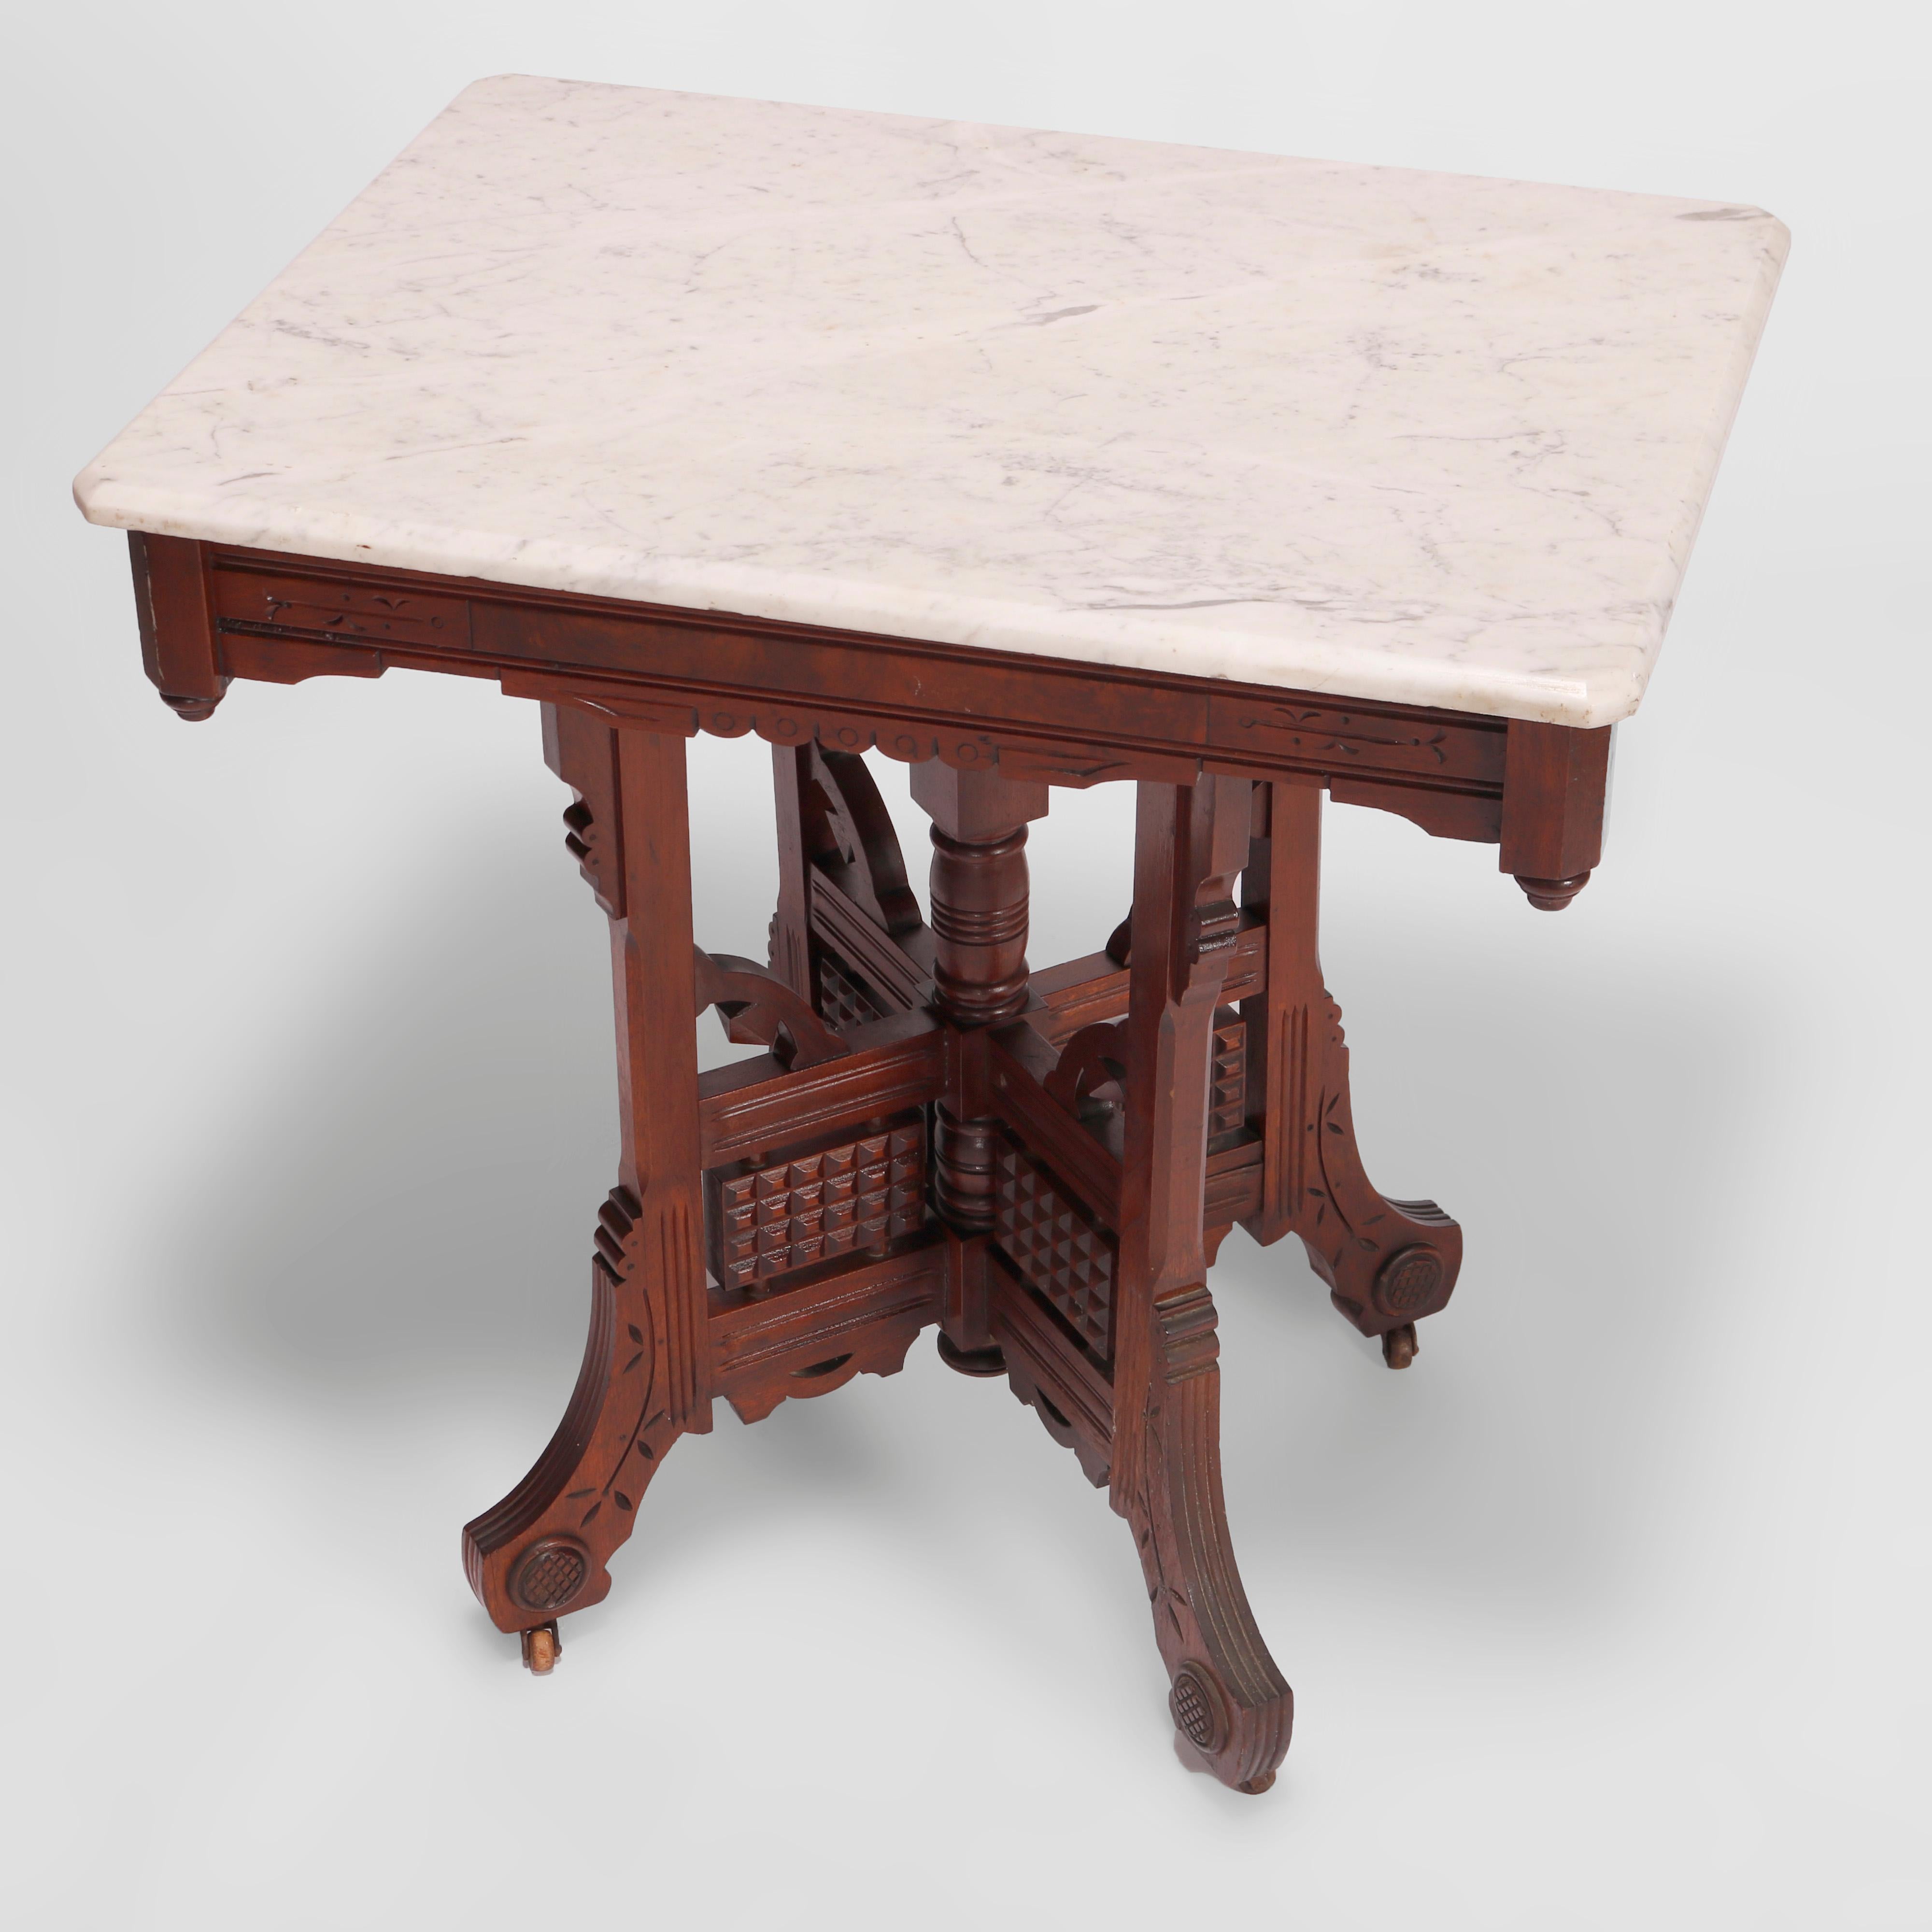 An antique Eastlake parlor table offers beveled clip-corner marble top over walnut base having burl insets, shaped skirt with drop finials, four supports with central column, raised on legs having incised foliate decoration and stylized scroll form